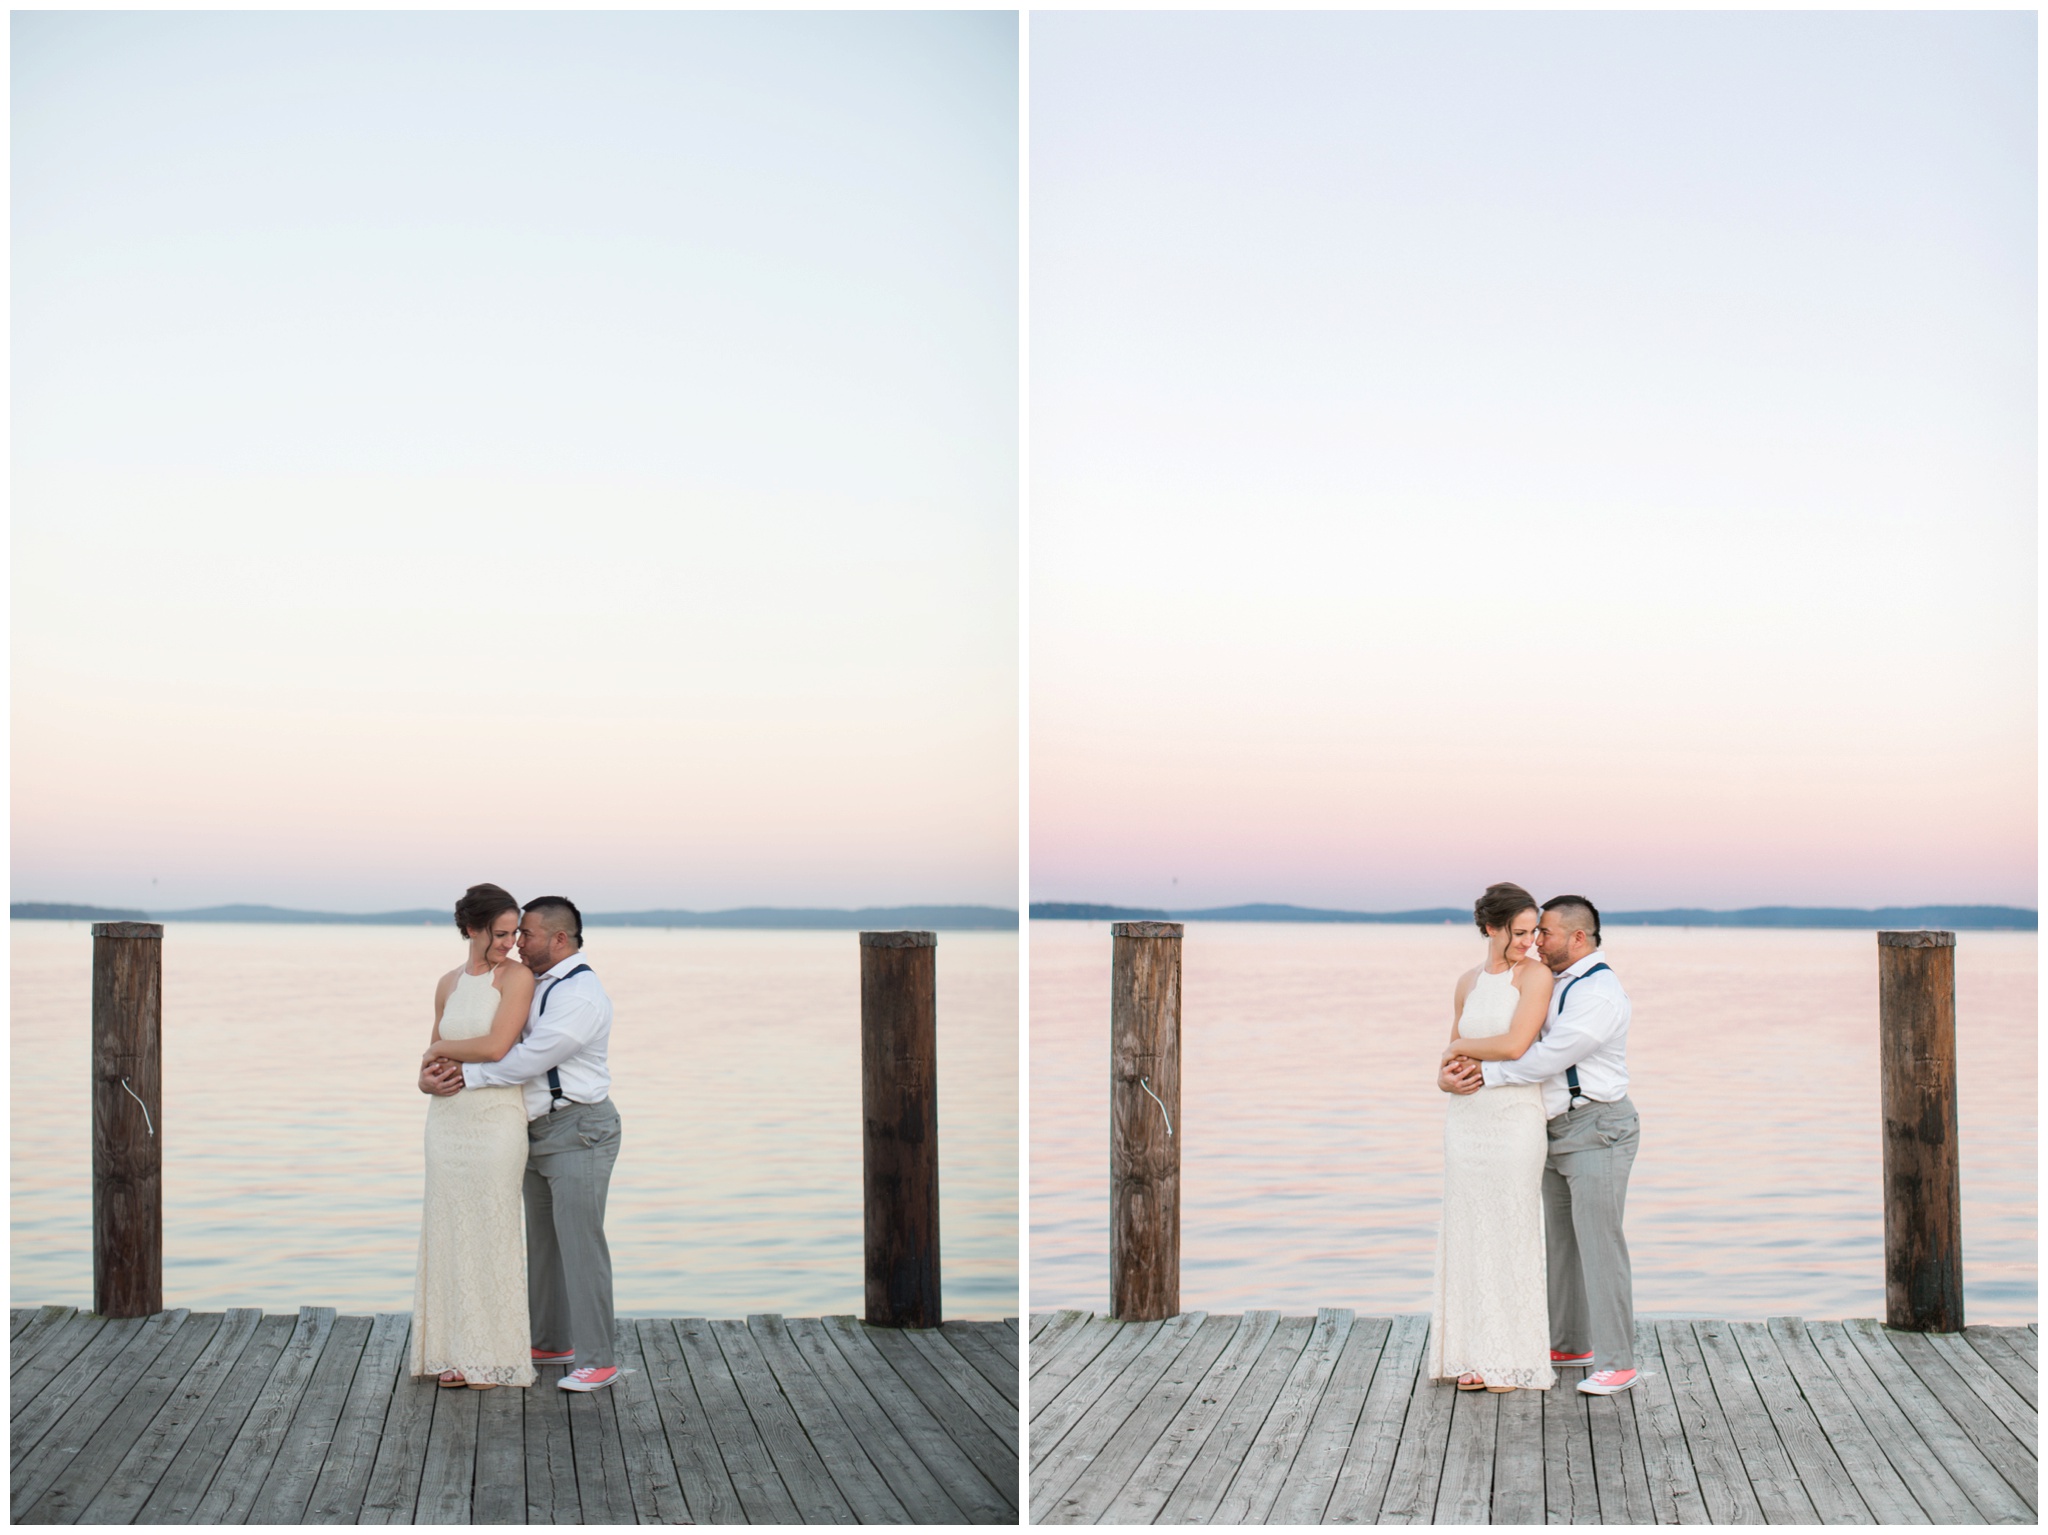 wedding photographer editing before and after photos